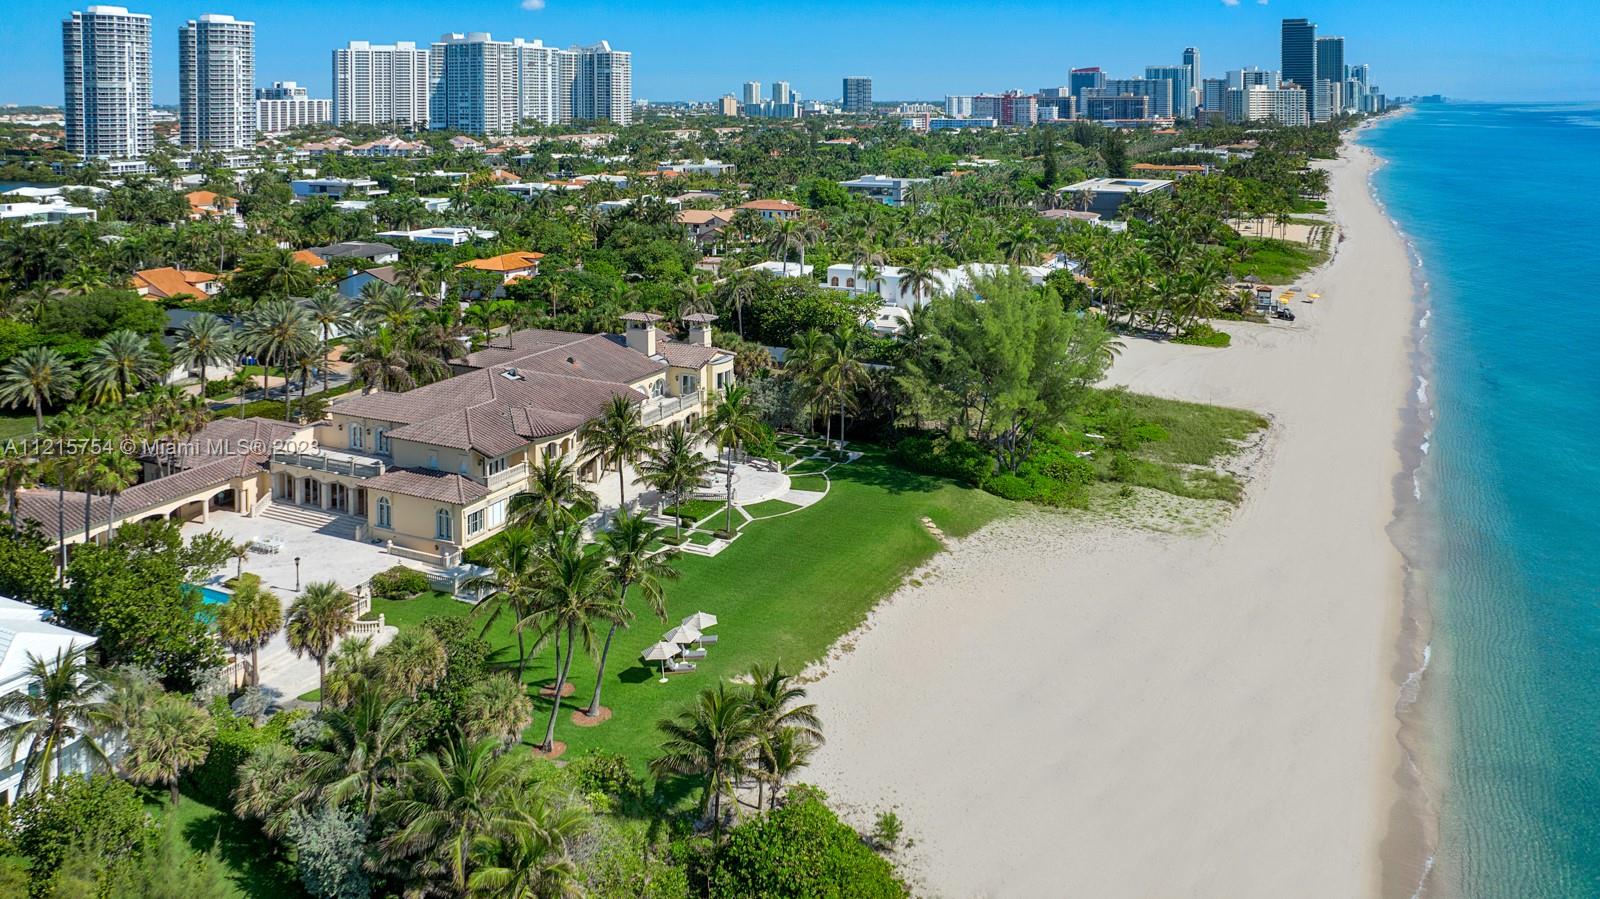 A Compound on the sands of Golden Beach princely positioned for the privacy seeker. With 250 linear feet of ocean frontage and 1.5 acres, this mega estate is the largest oceanfront property in Miami. Decorator ready with plans and permits in process for a 10 bedroom, 3 staff room, 6 car garage, 30,000SF+ Mansion. With 5 bedrooms facing the ocean, along with all key living areas and 11ft - 23ft ceilings throughout, the spacial planning was light years ahead. Seaside breezes are appreciated from the loggia, poolside cabana, 58ft swimming pool, grand veranda, and a swoon-worthy green lawn. On the market for the first time in nearly 40 years, this one-of-one trophy exudes Palm Beach elegance amidst Golden Beach’s prized amenities: private beach, tennis courts, clubhouse & its own police force.